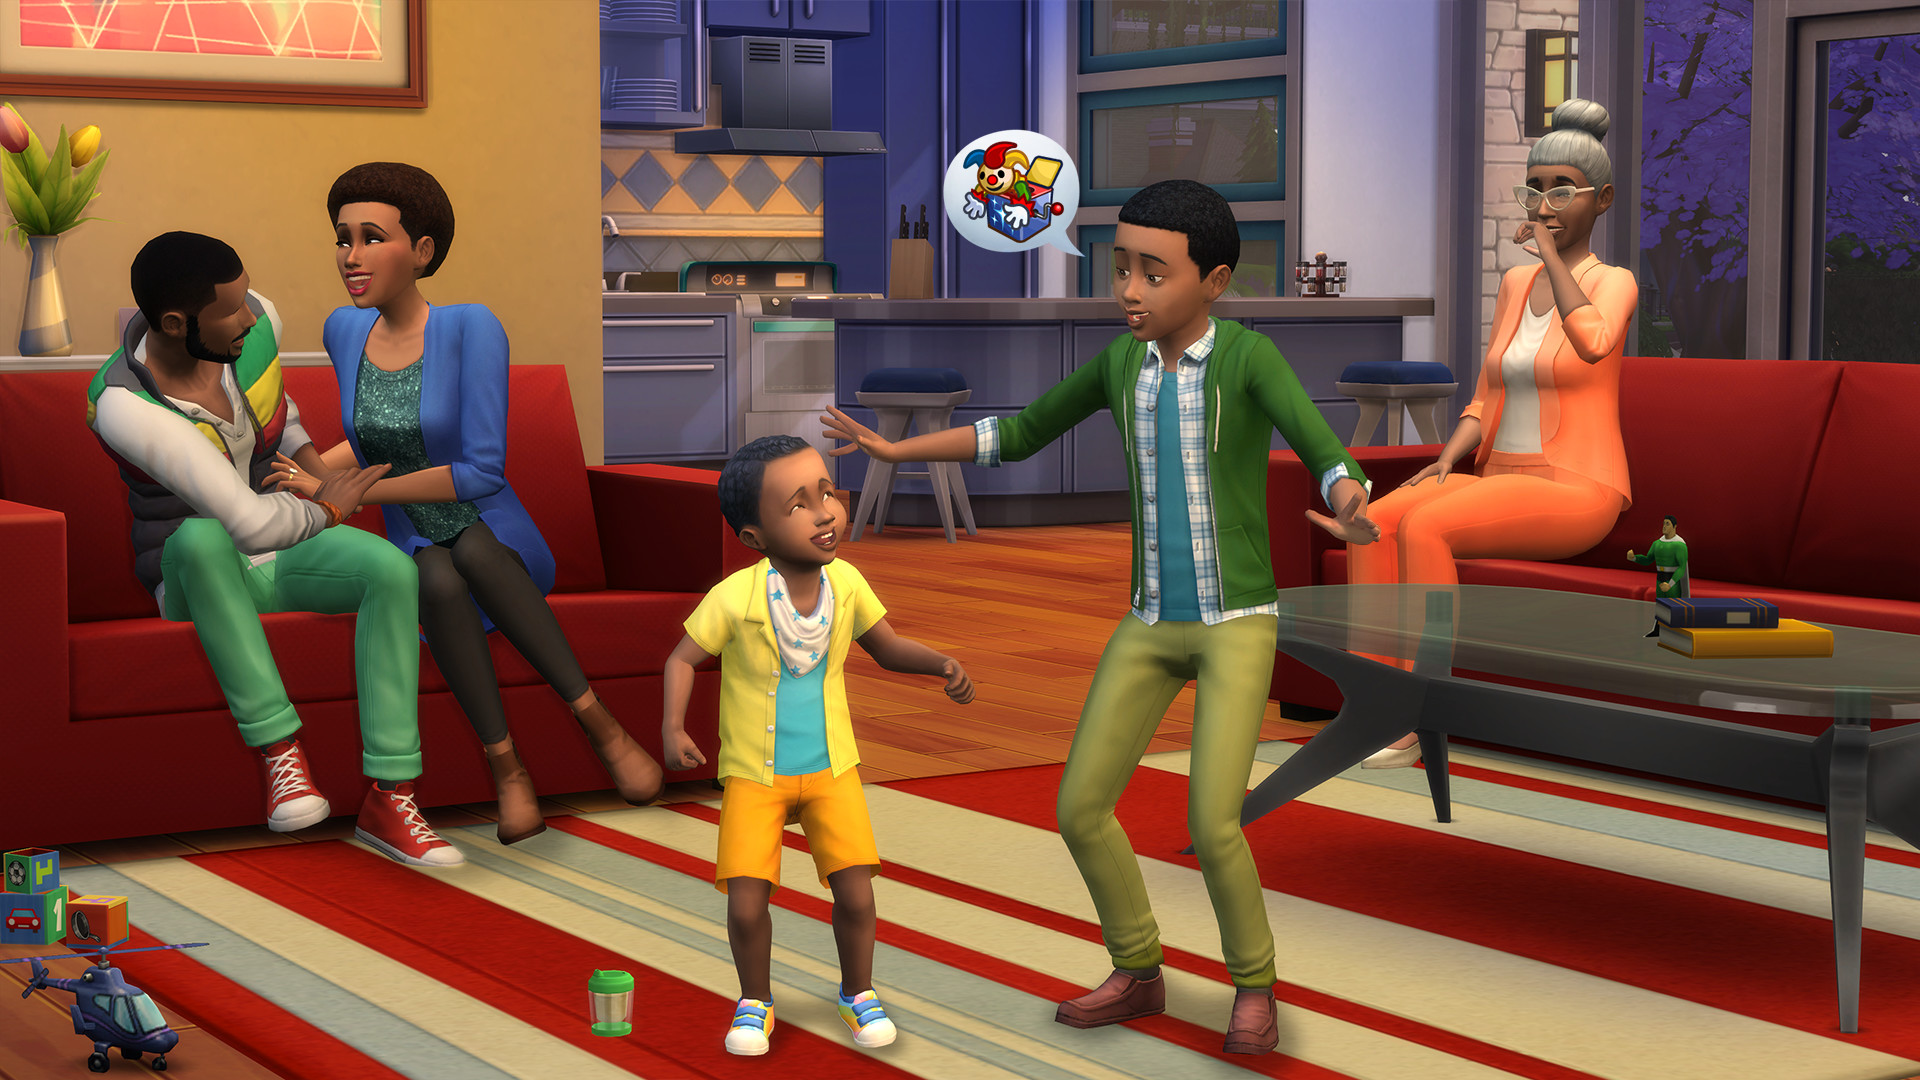 You Can Now Download And Play The Sims 4 For FREE - MTL Blog